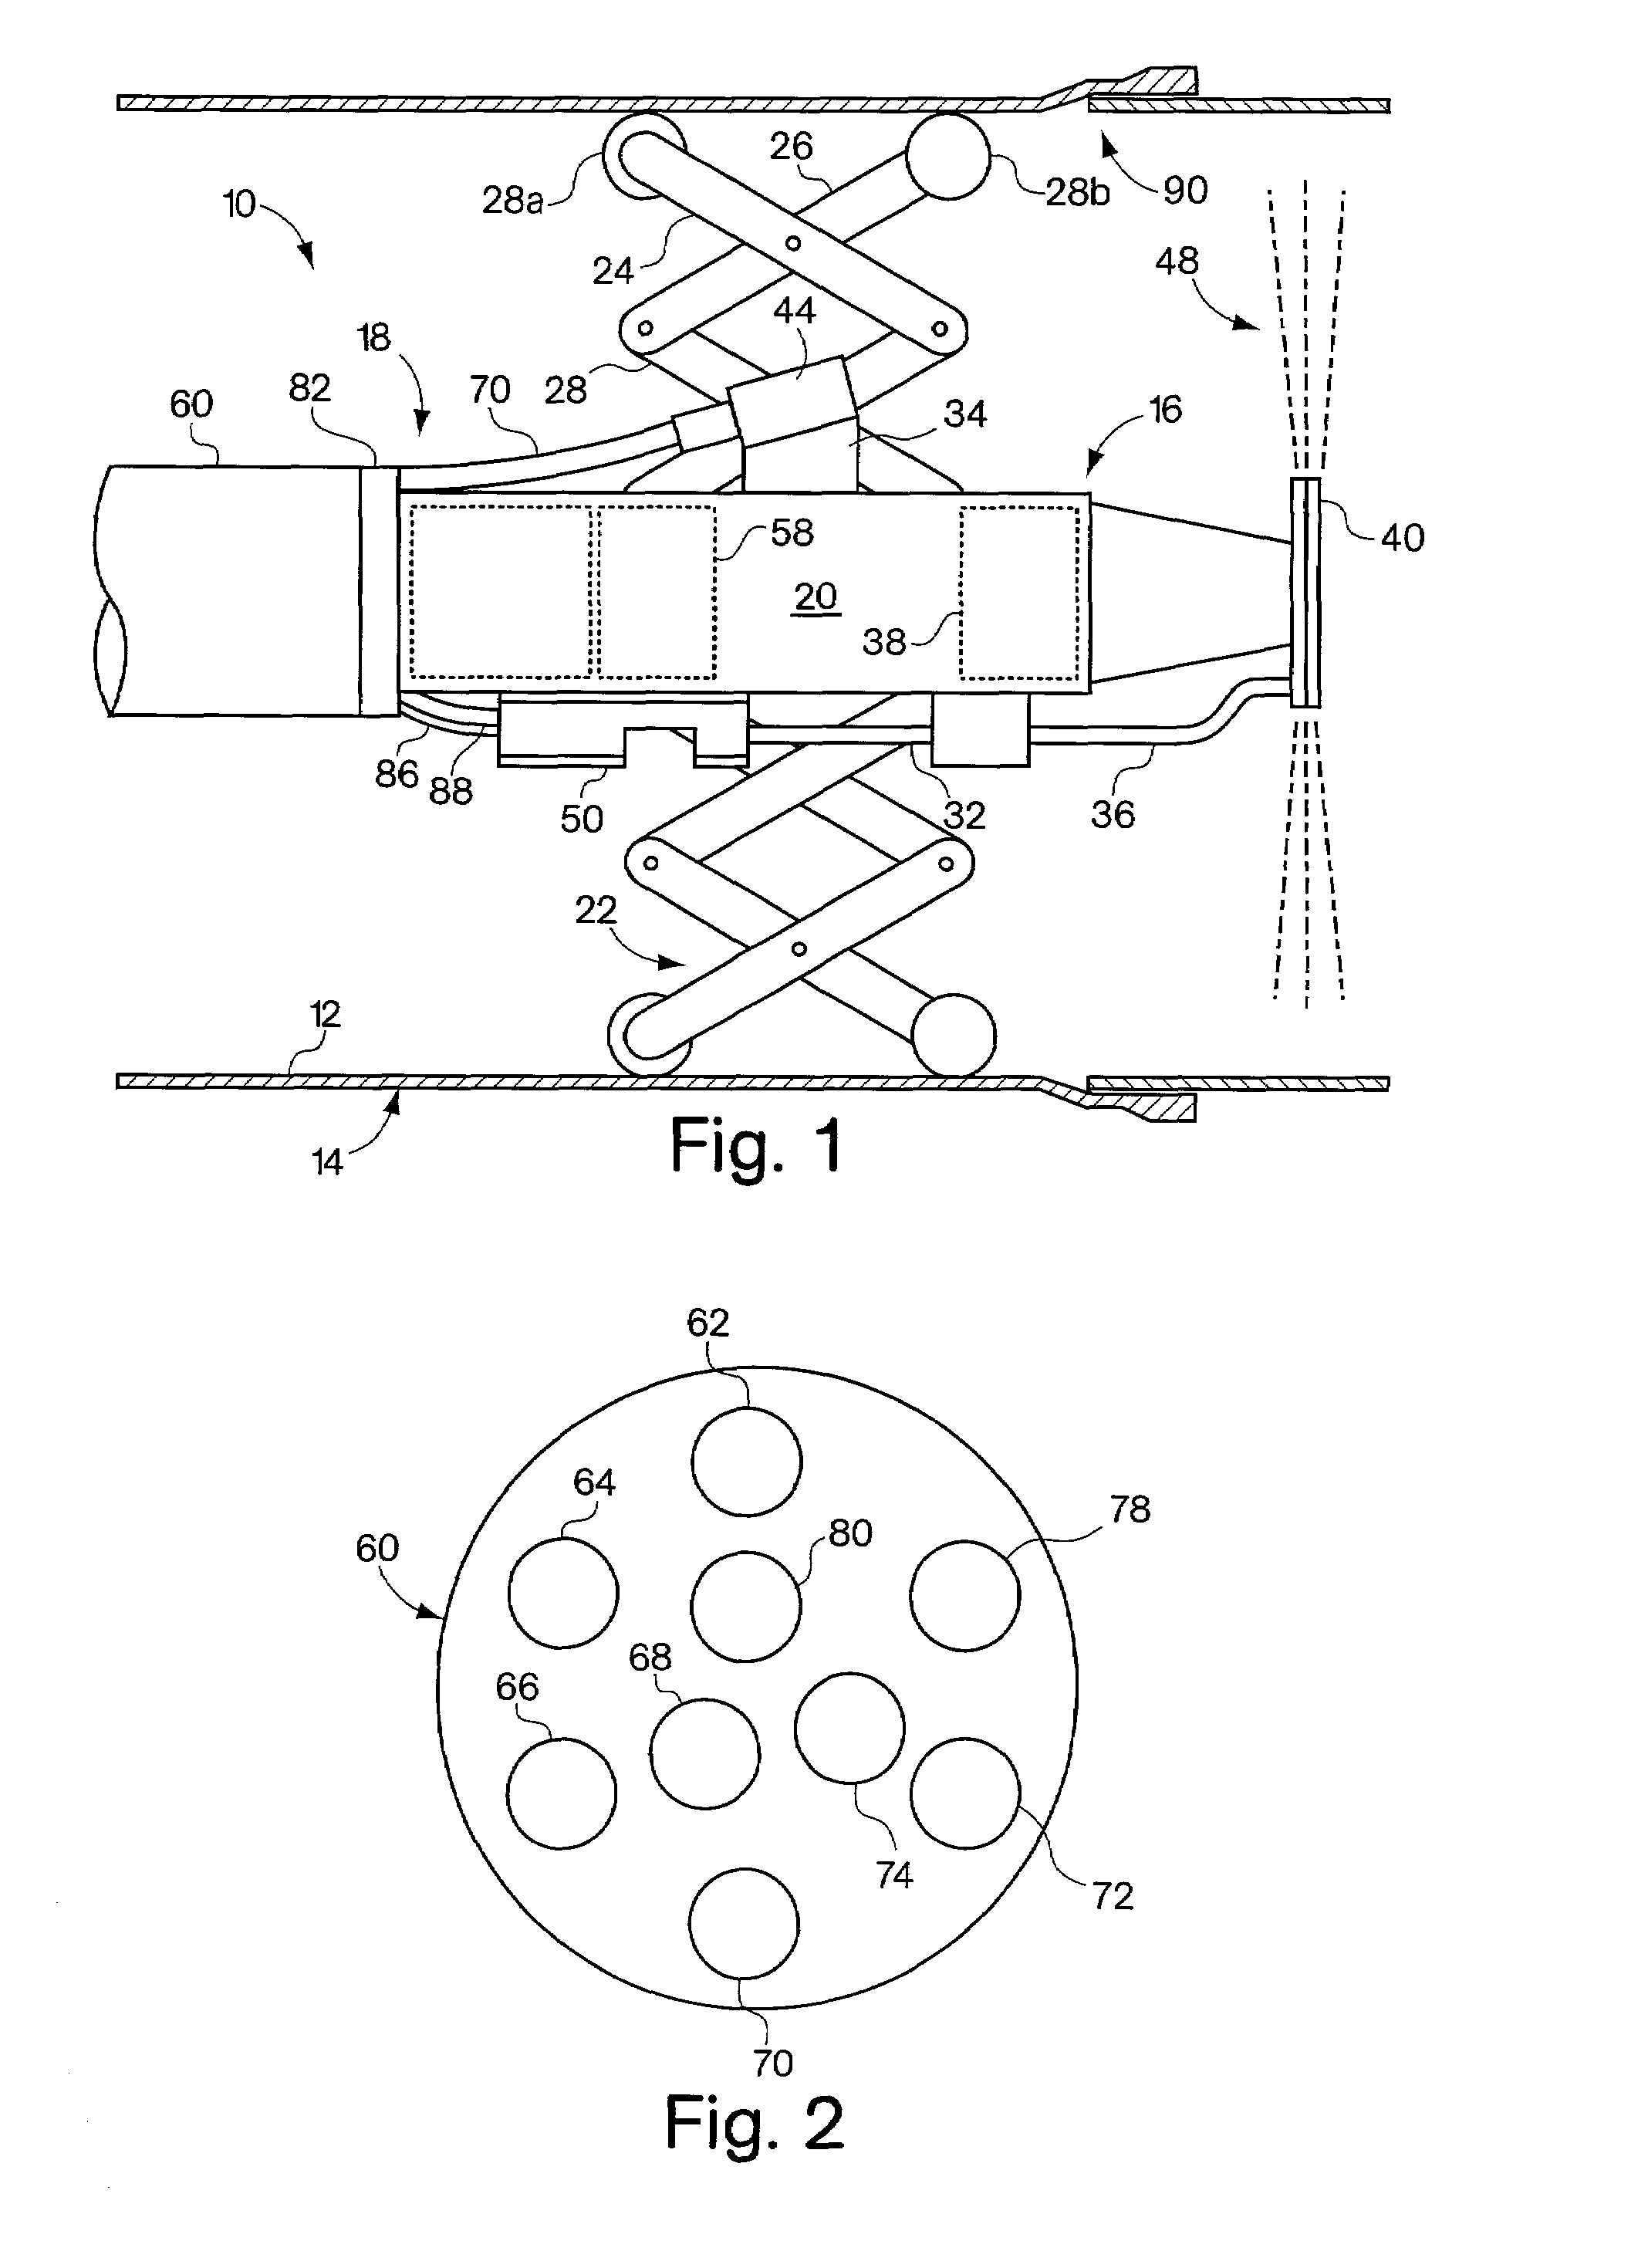 Method and apparatus for treating underground pipeline